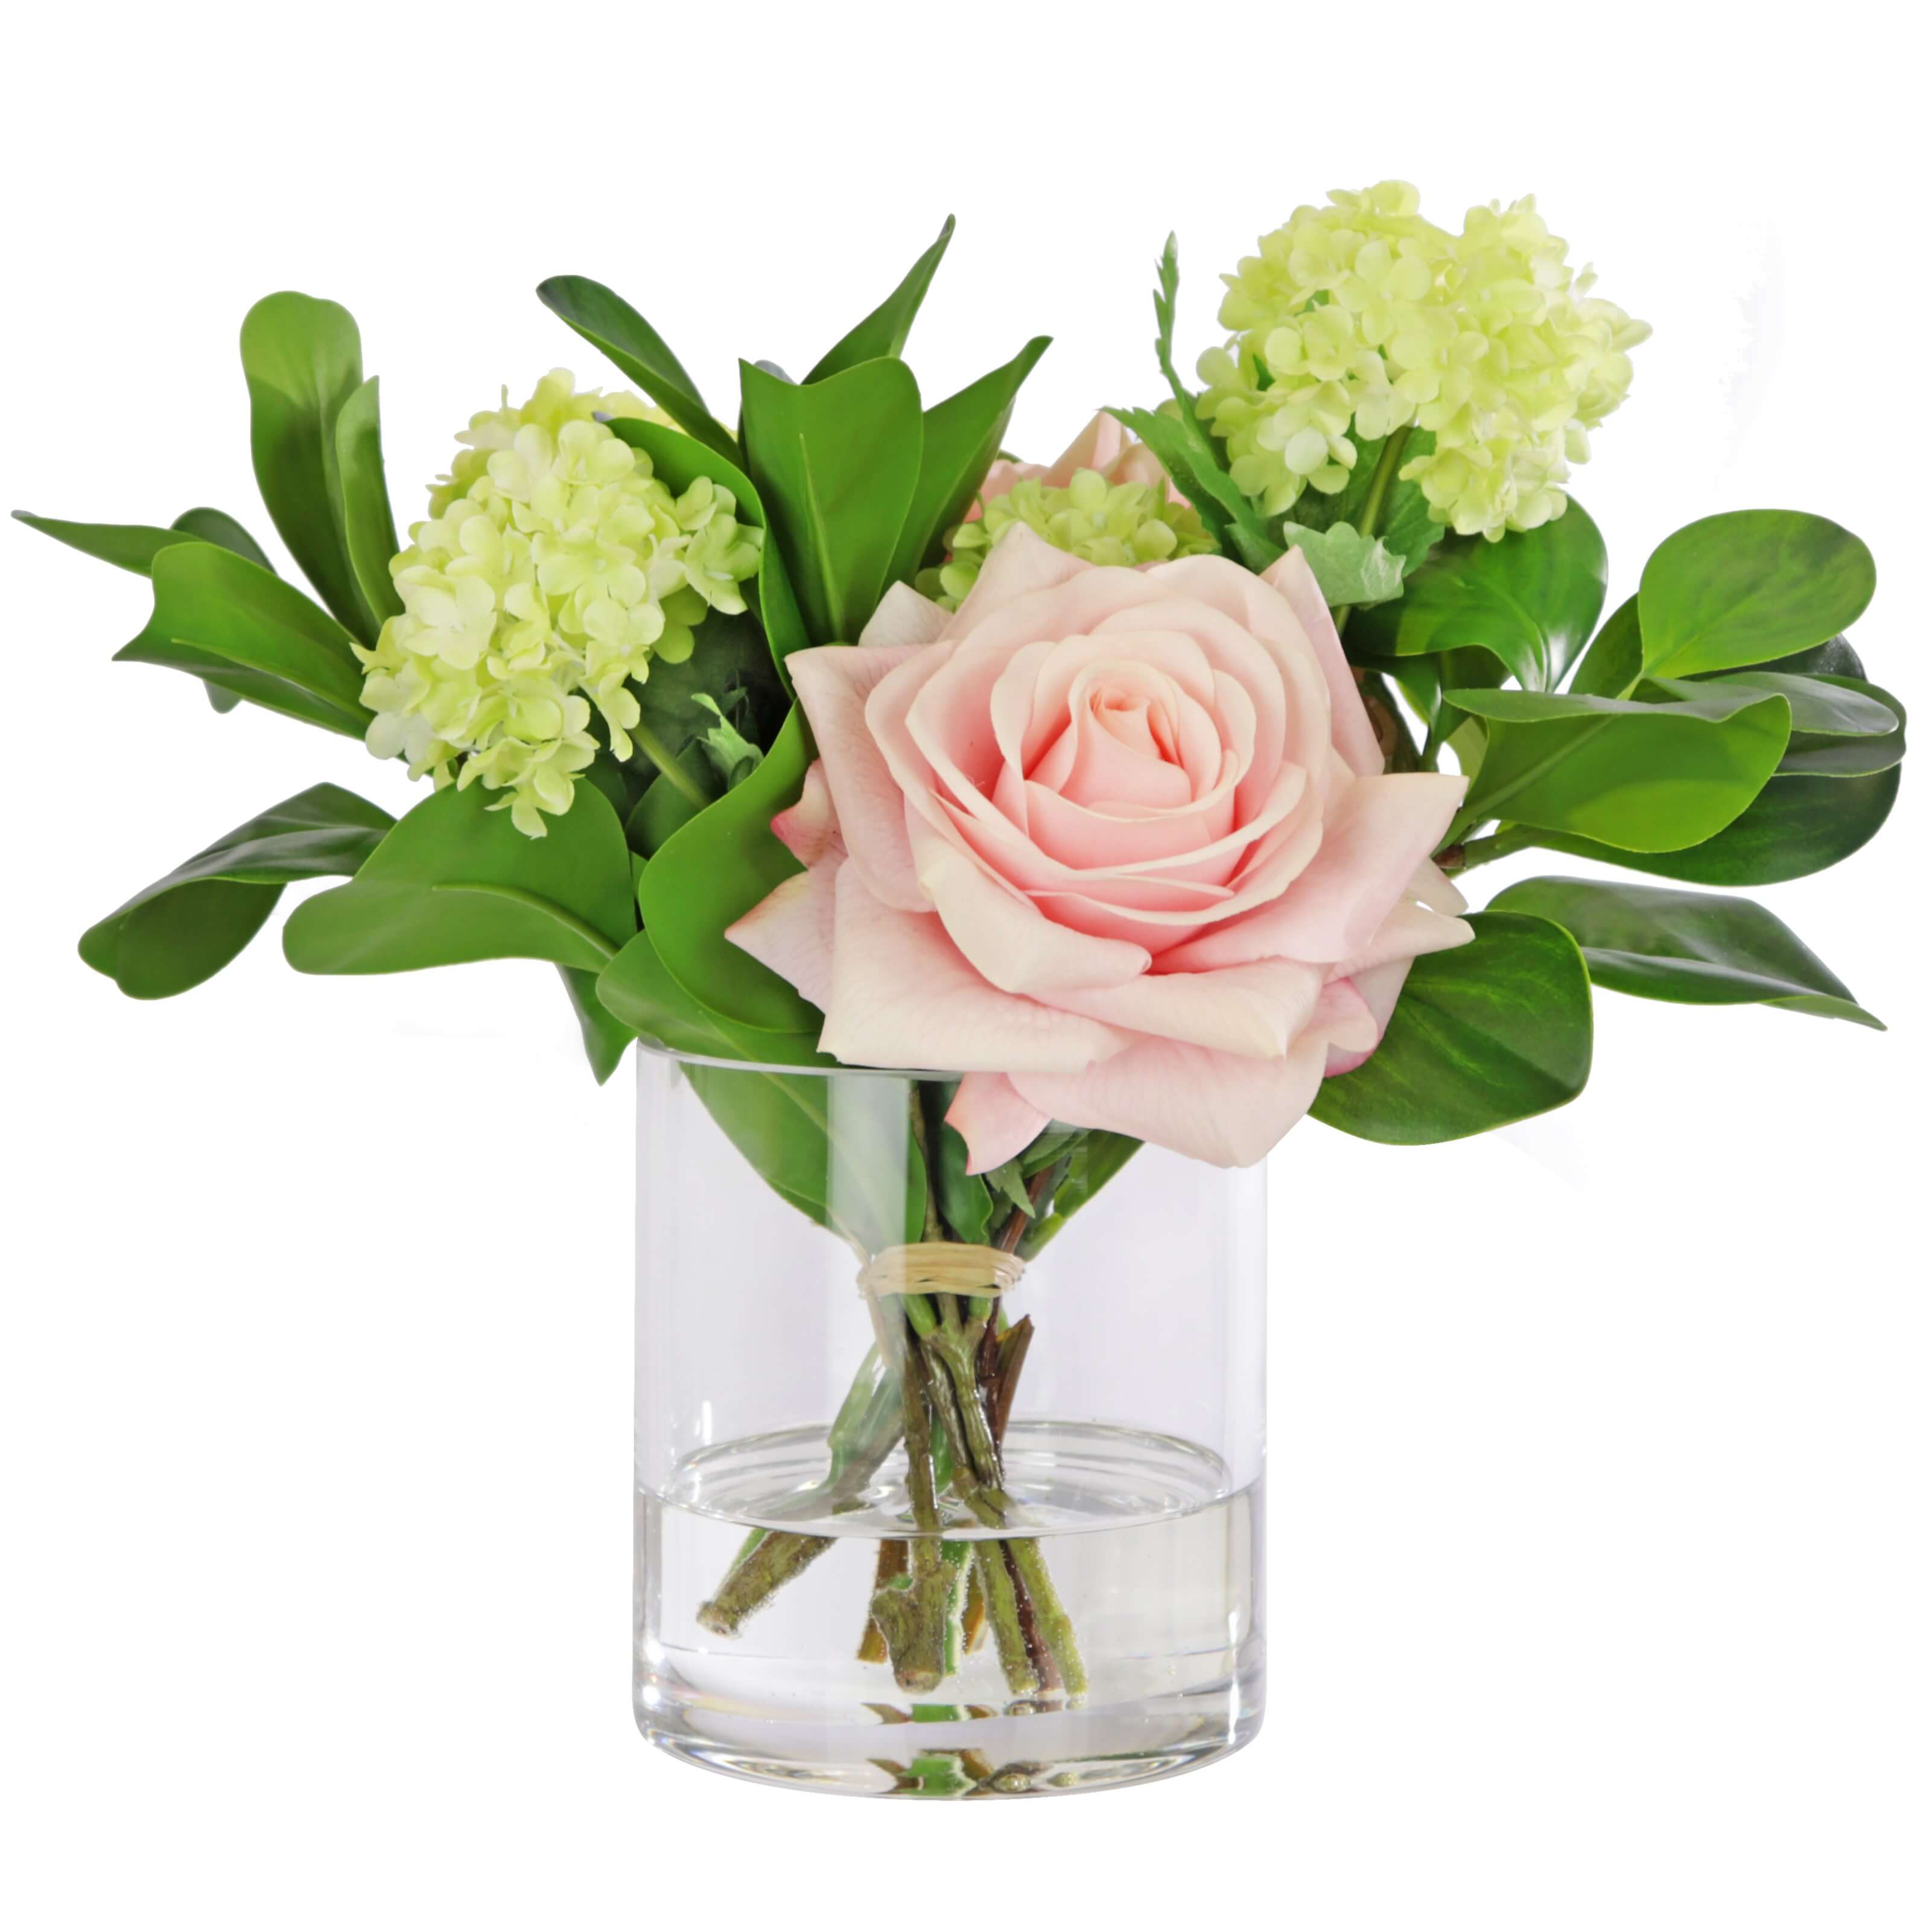 Artificial flower arrangement using roses and faux greenery